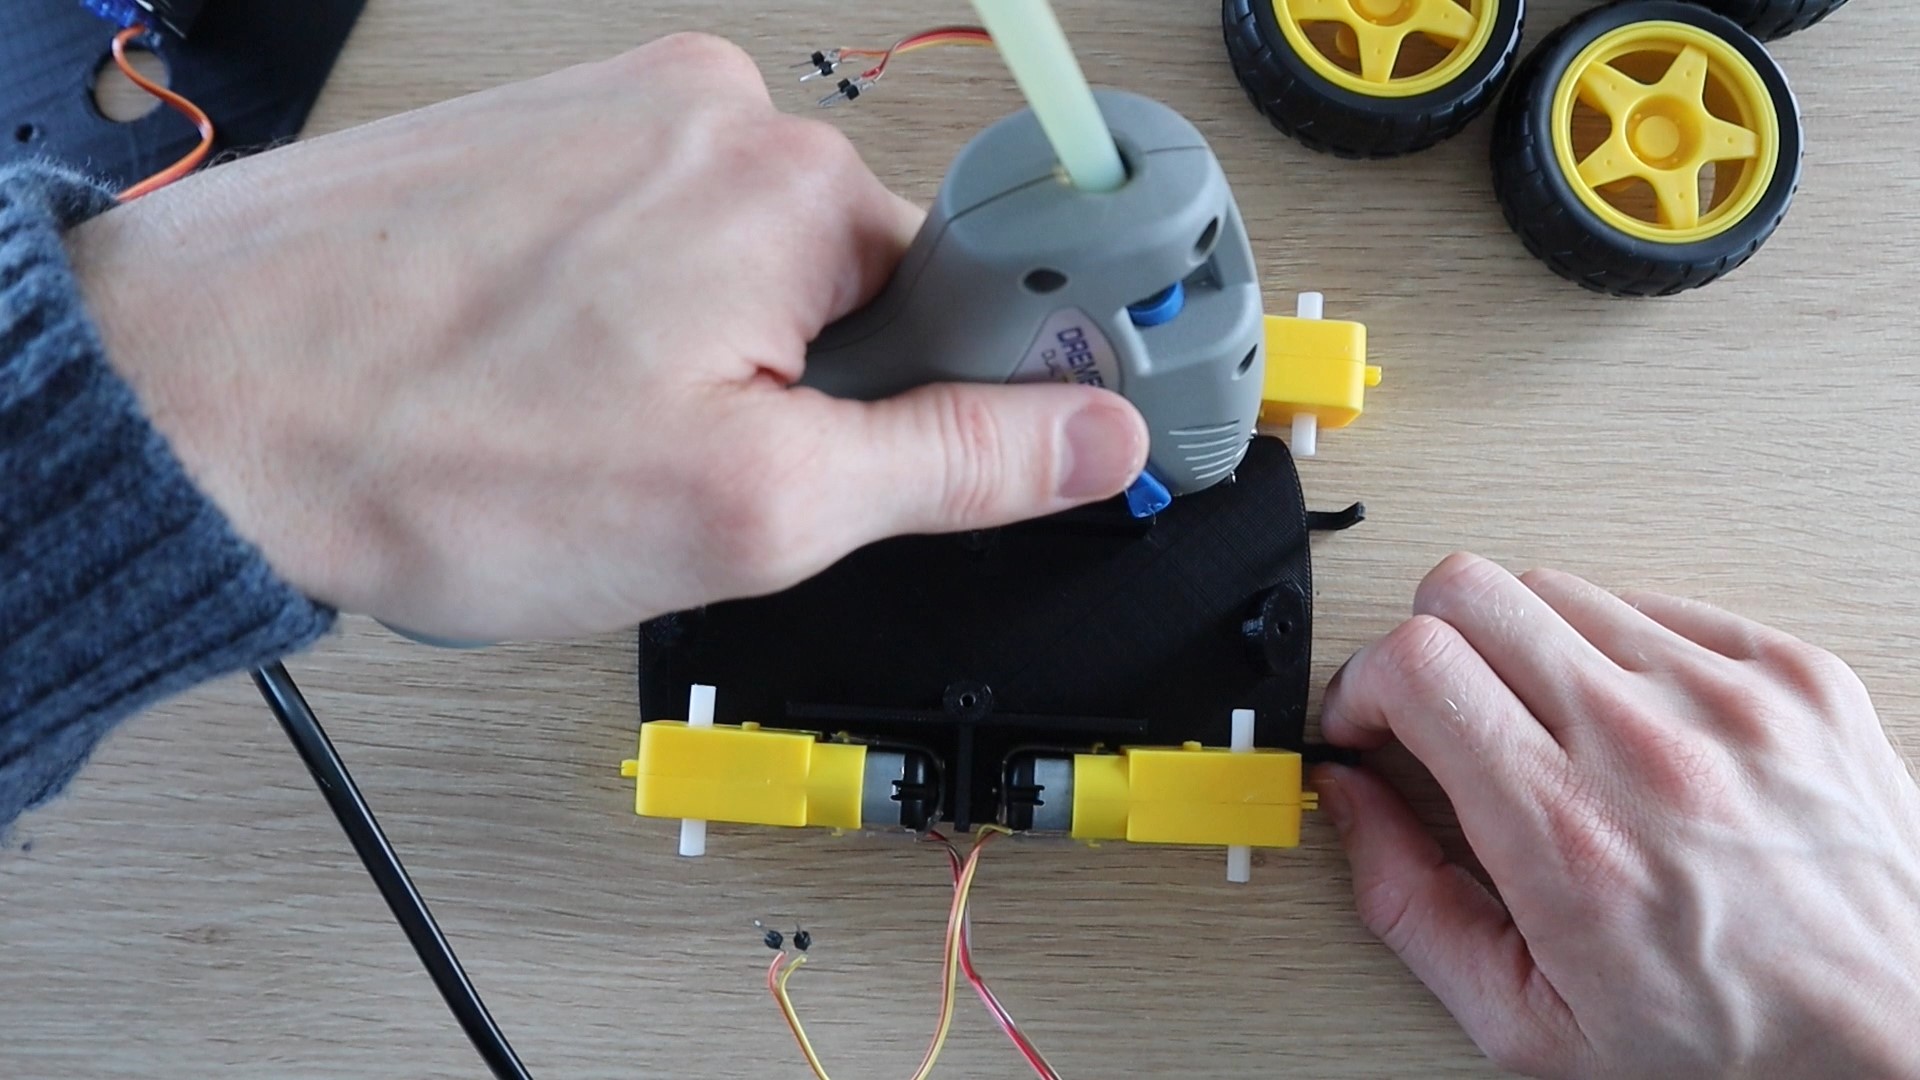 Glue The Four Motors Into Place